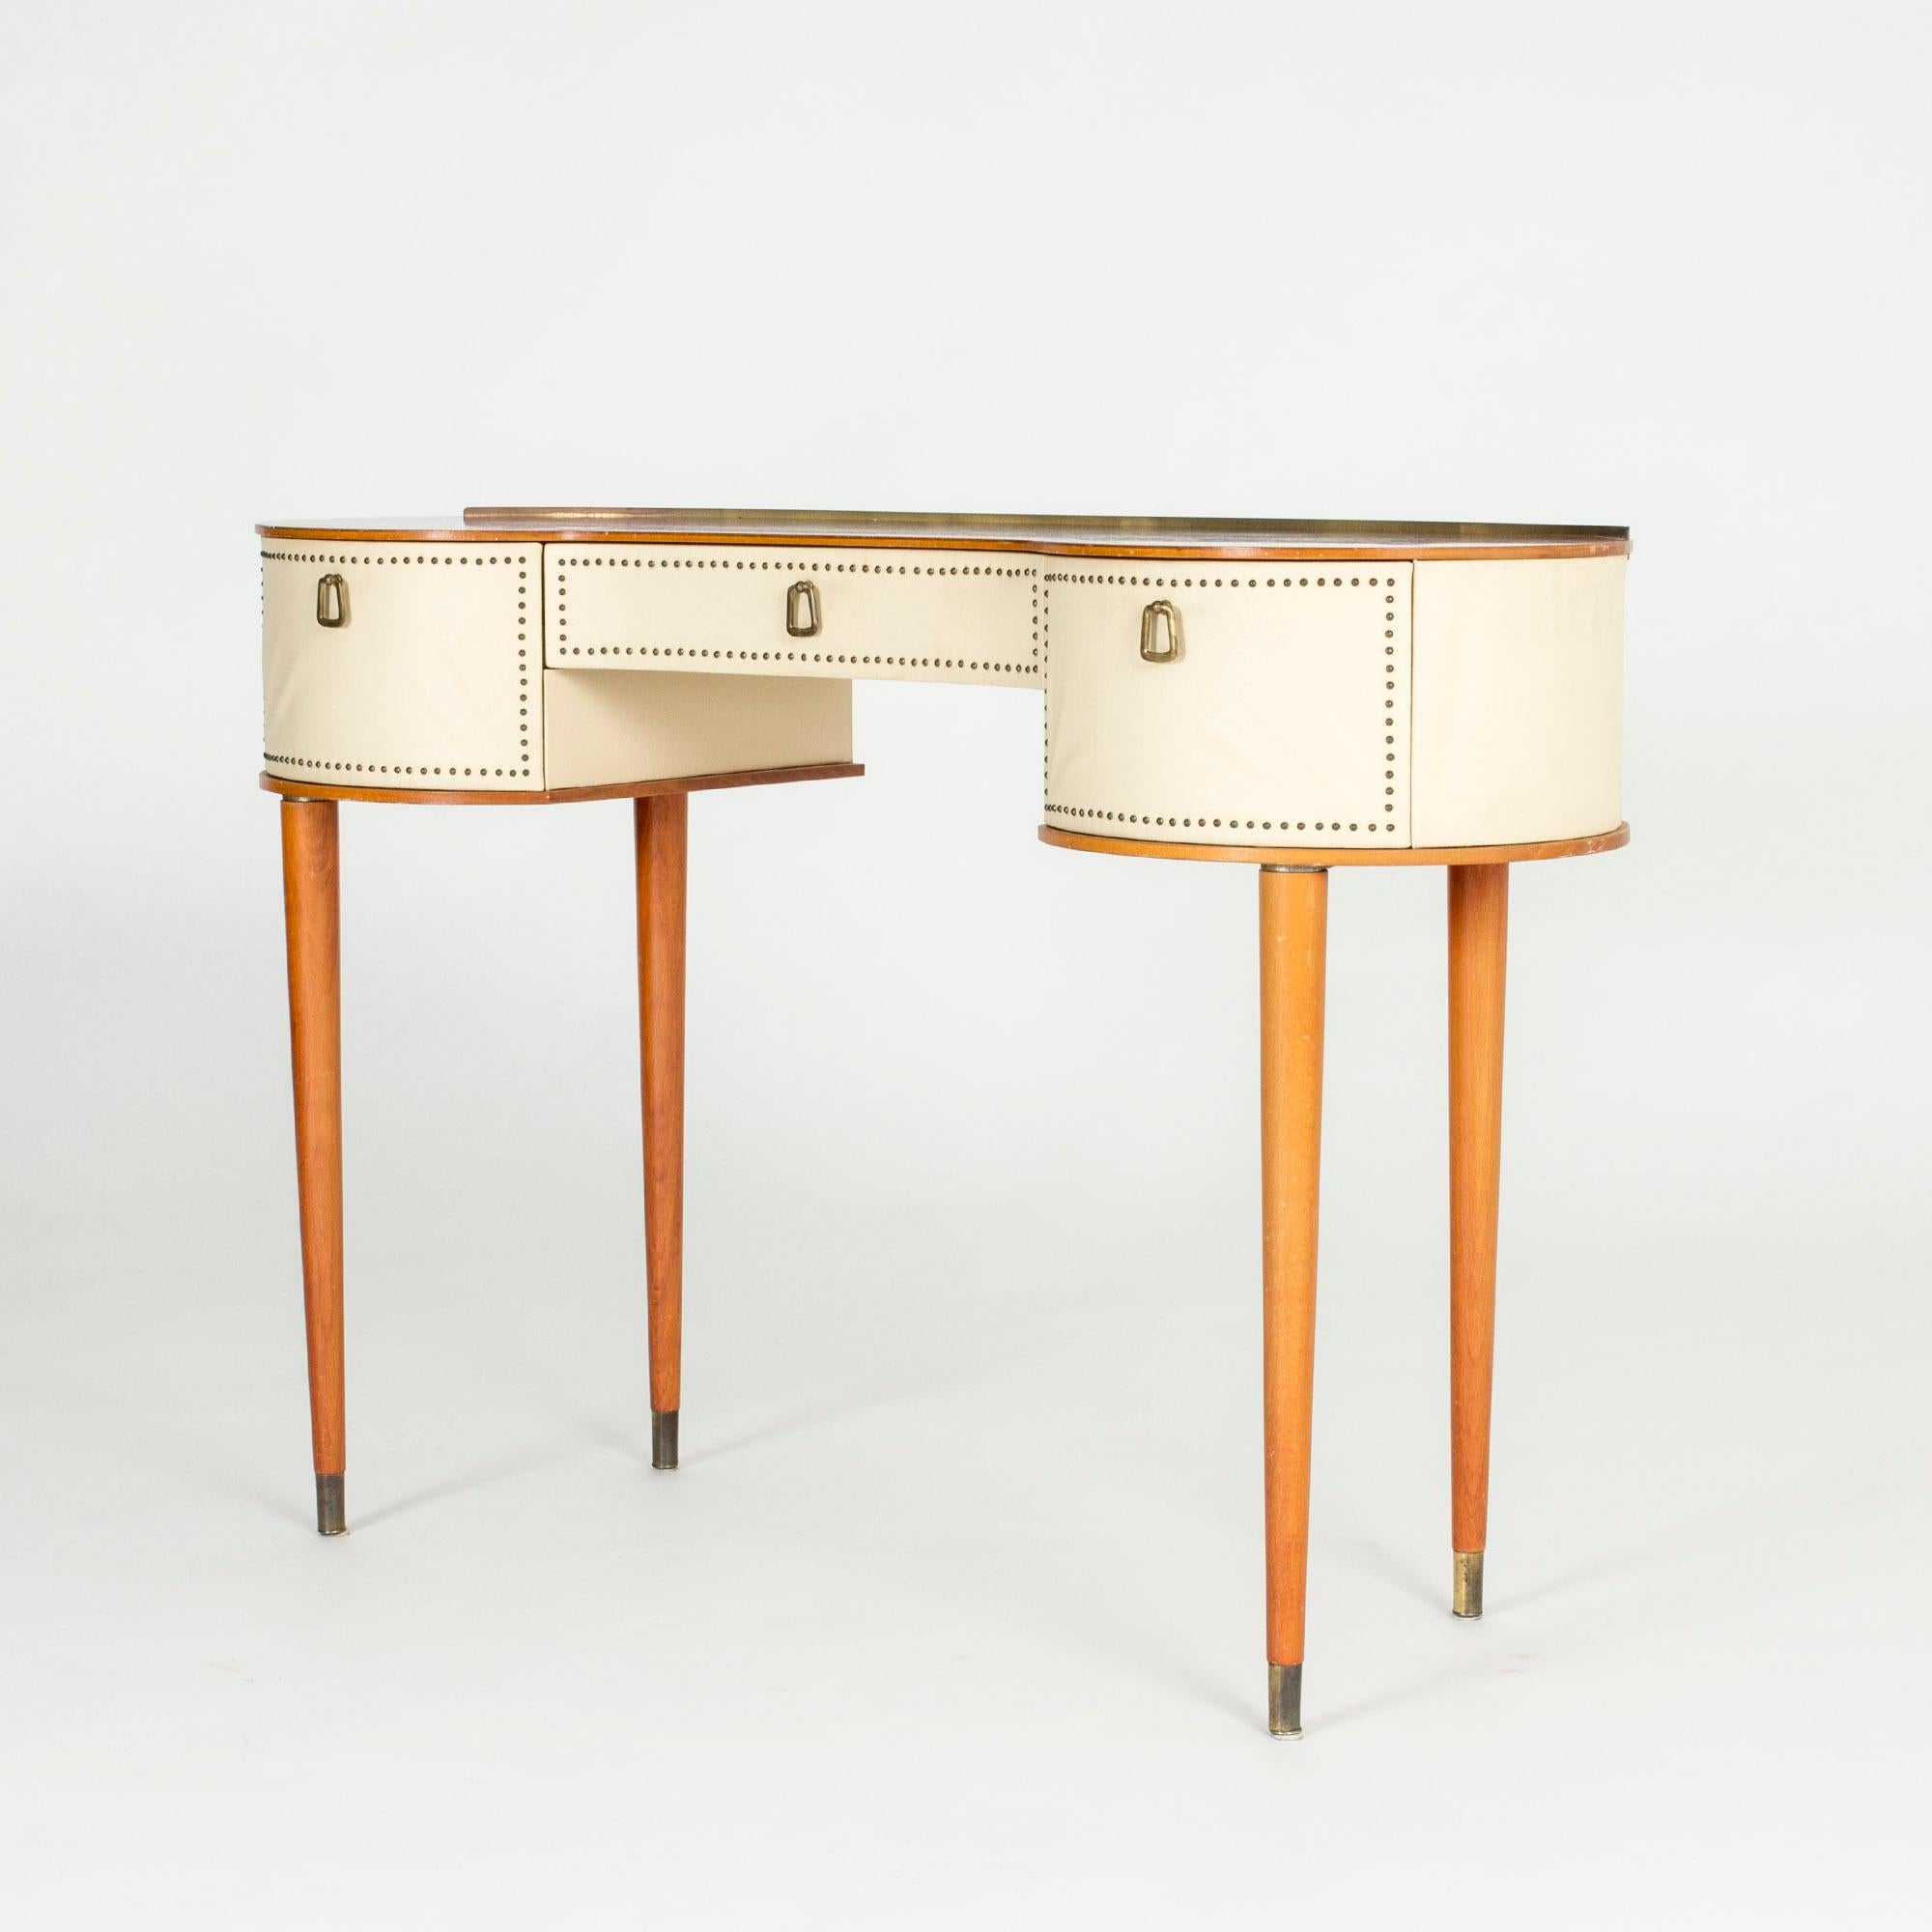 Neat dressing table by Halvdan Pettersson, with an organic teak tabletop framed by an elegant brass rim. Sides dressed in white faux leather and decorated with brass nails. Brass feet.